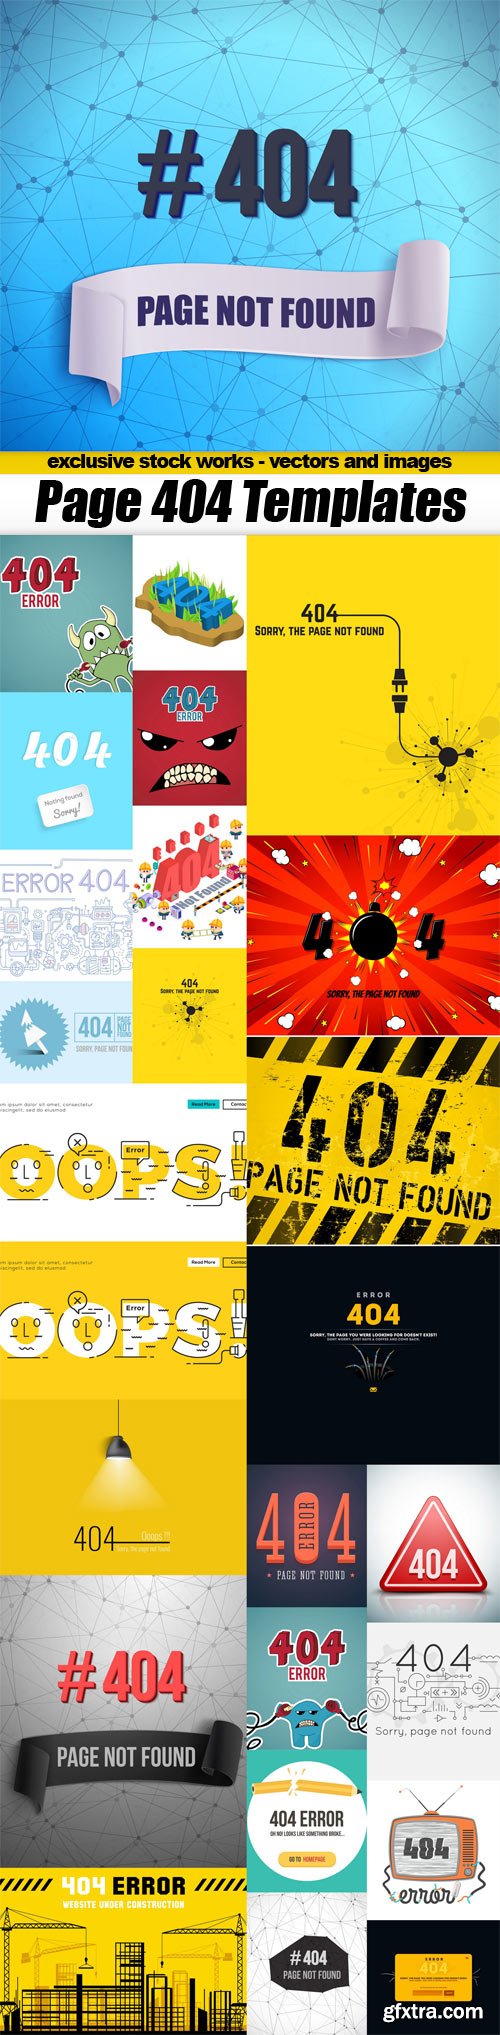 Page 404 Templates - 25x EPS